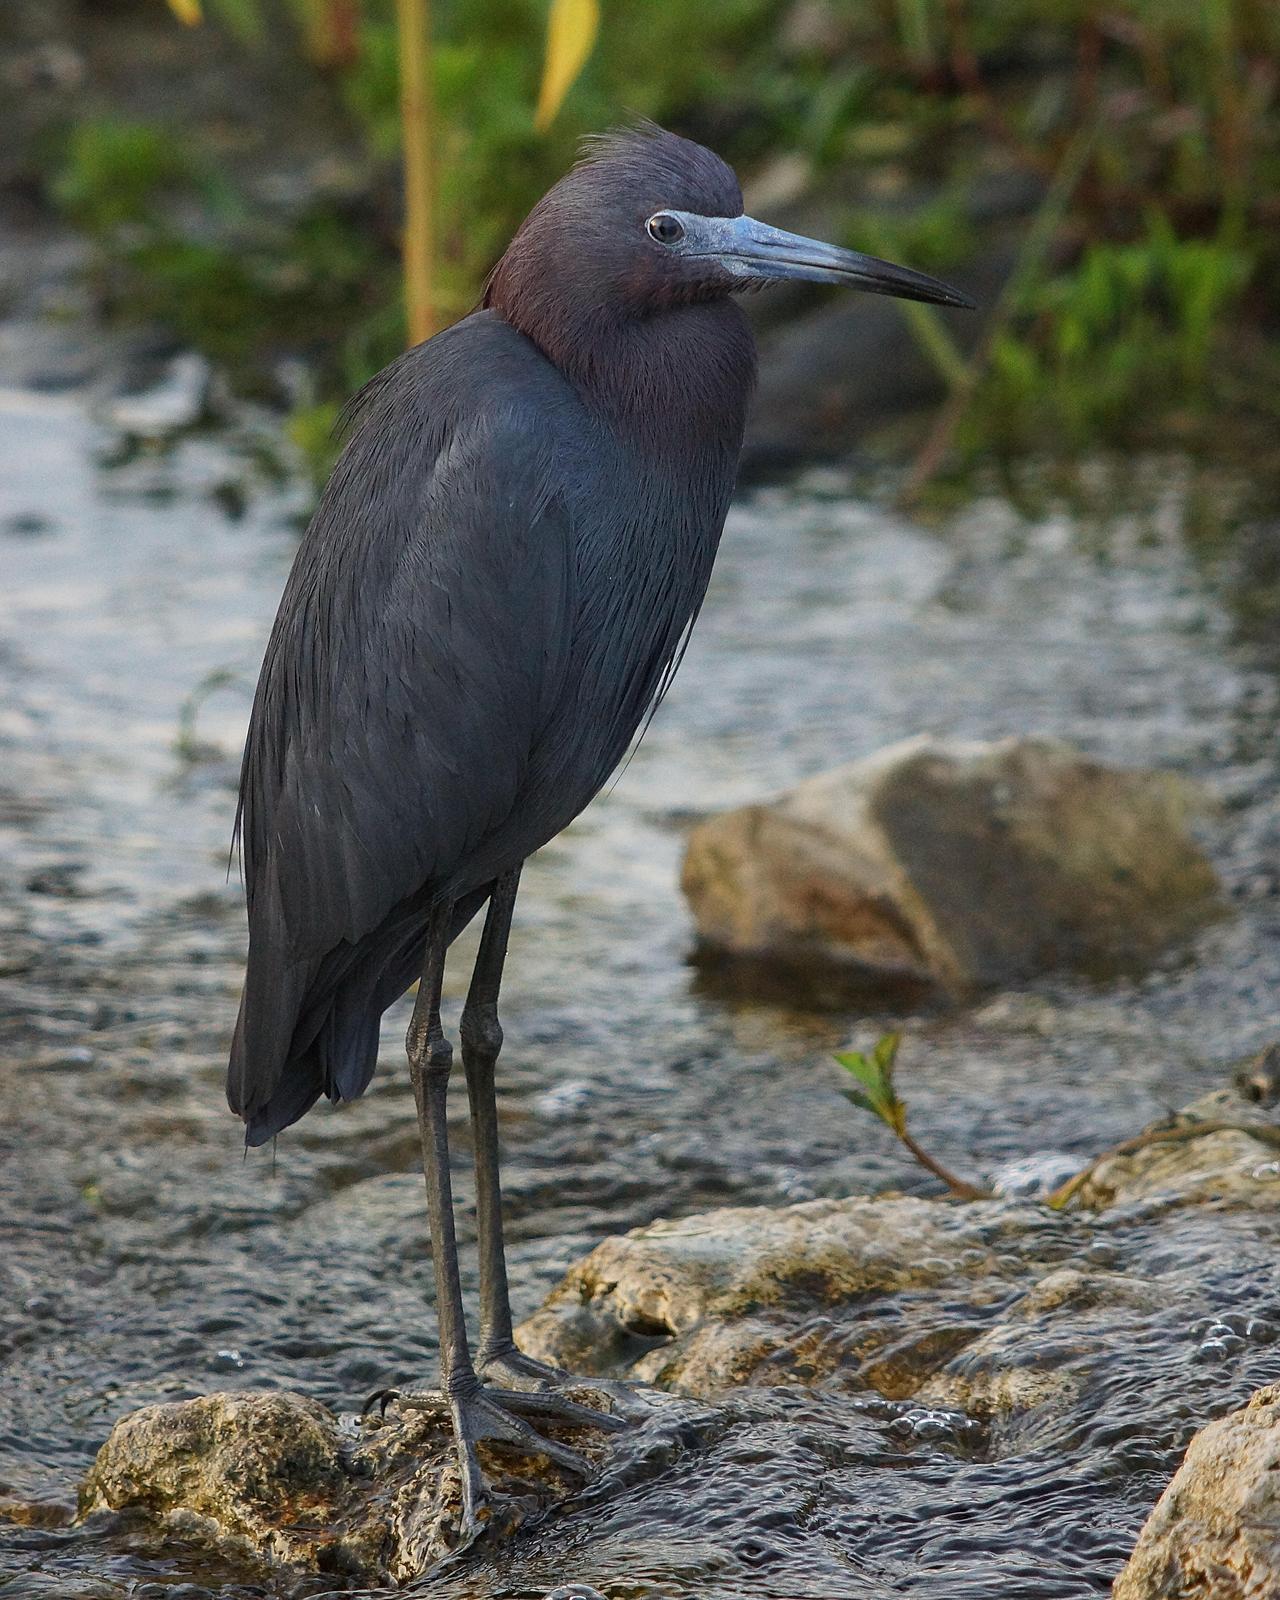 Little Blue Heron Photo by Emily Percival